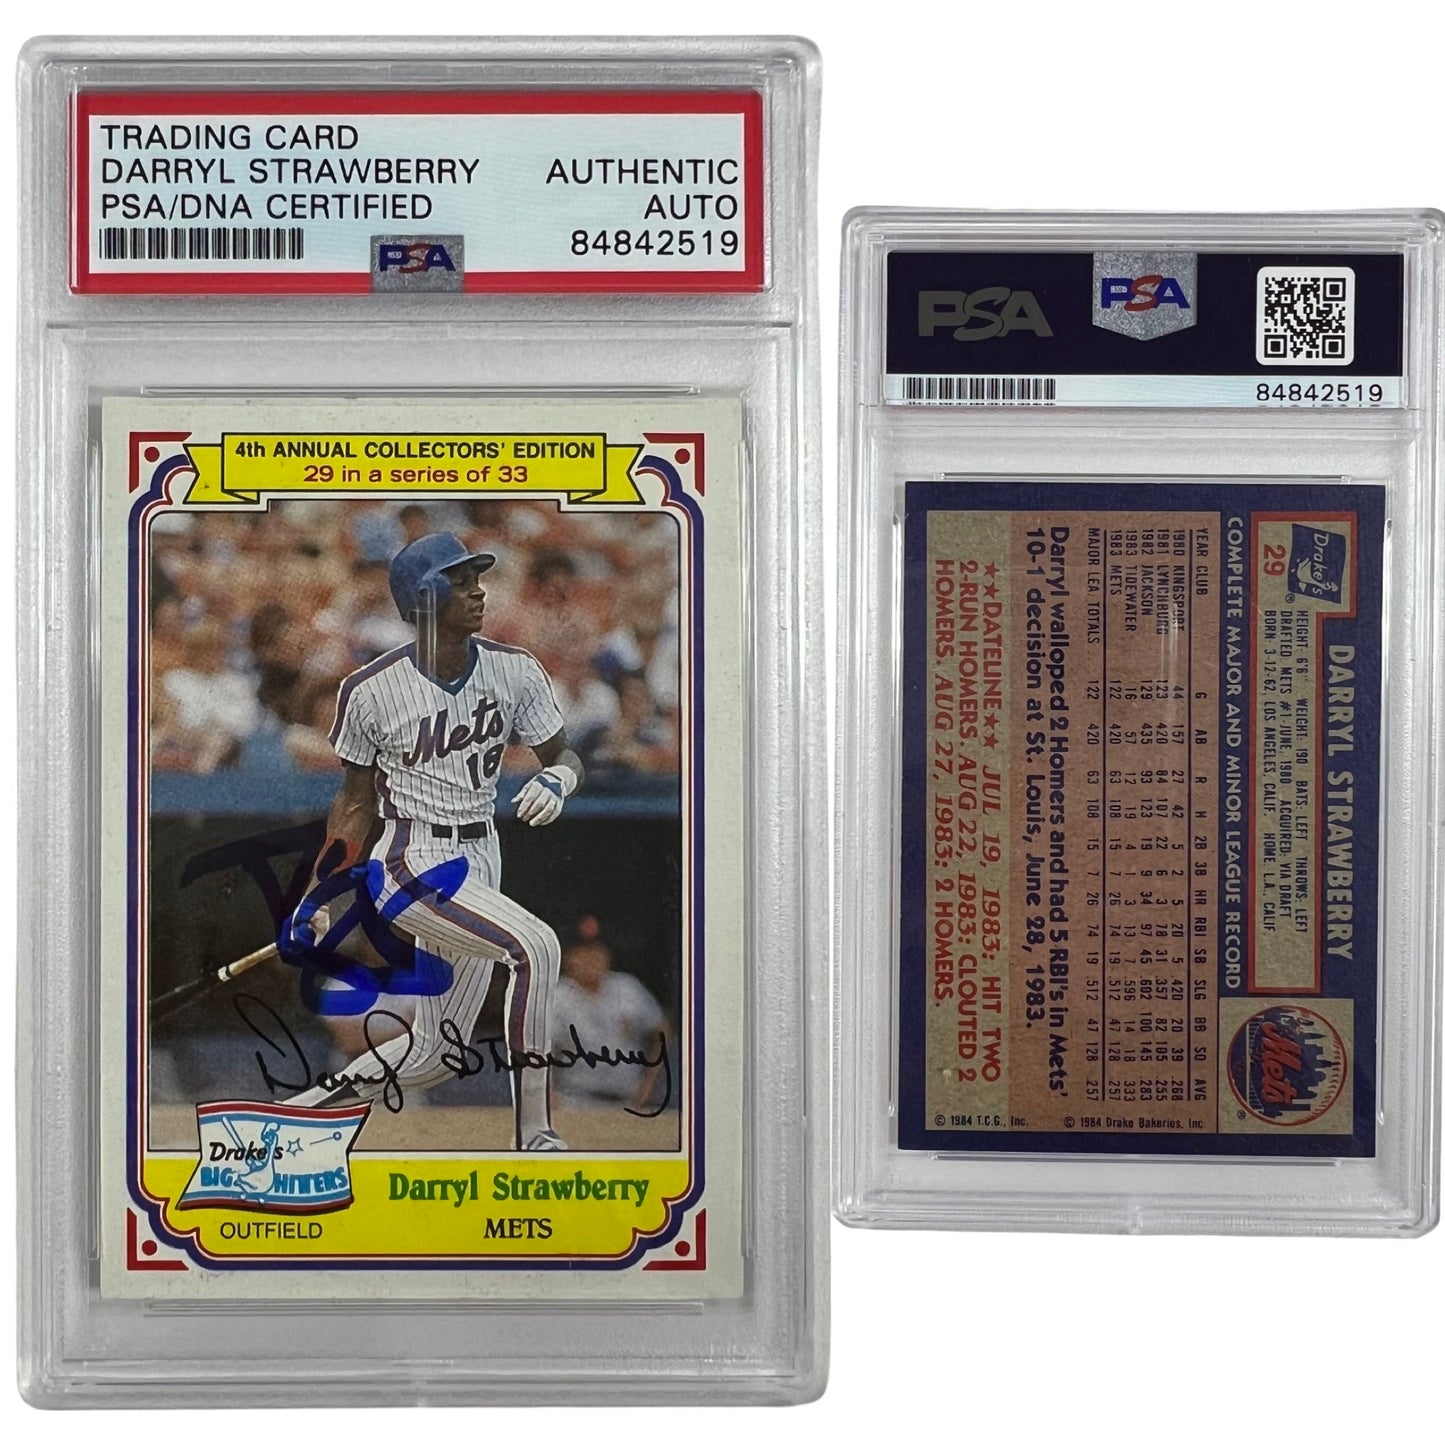 1984 Darryl Strawberry Topps Drakes Big Hitters #29 Autographed PSA Auto Authentic